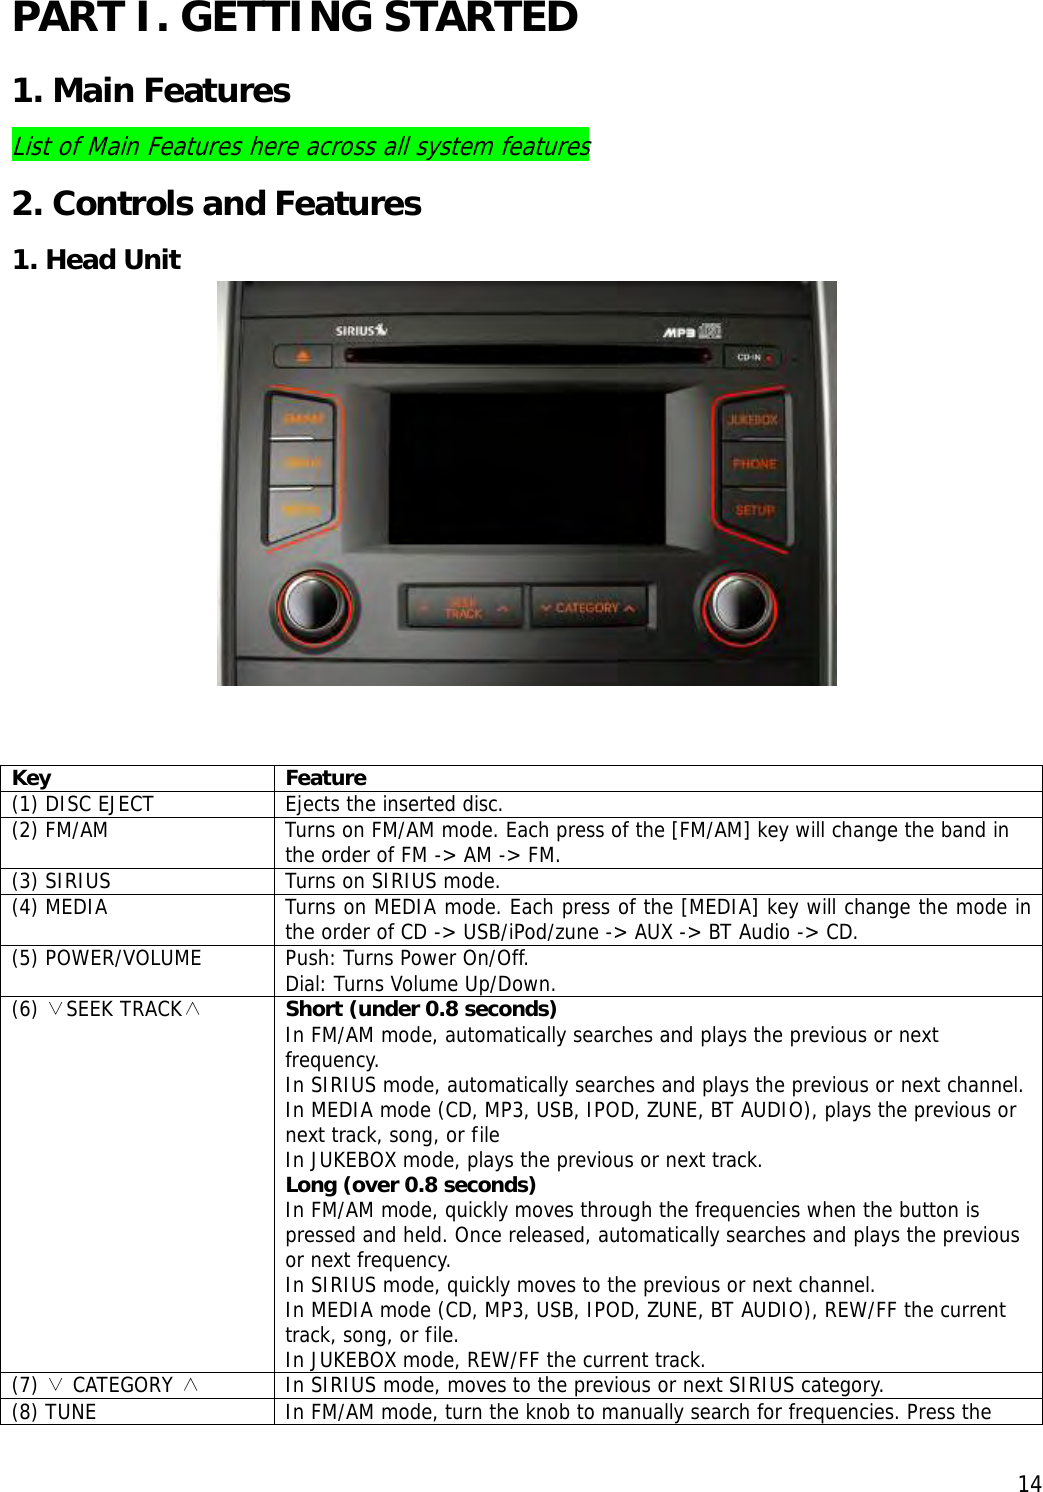  14PART I. GETTING STARTED 1. Main Features List of Main Features here across all system features 2. Controls and Features 1. Head Unit   Key Feature (1) DISC EJECT  Ejects the inserted disc. (2) FM/AM  Turns on FM/AM mode. Each press of the [FM/AM] key will change the band in the order of FM -&gt; AM -&gt; FM. (3) SIRIUS  Turns on SIRIUS mode.  (4) MEDIA   Turns on MEDIA mode. Each press of the [MEDIA] key will change the mode in the order of CD -&gt; USB/iPod/zune -&gt; AUX -&gt; BT Audio -&gt; CD. (5) POWER/VOLUME  Push: Turns Power On/Off. Dial: Turns Volume Up/Down. (6) ∨SEEK TRACK∧ Short (under 0.8 seconds) In FM/AM mode, automatically searches and plays the previous or next frequency. In SIRIUS mode, automatically searches and plays the previous or next channel.In MEDIA mode (CD, MP3, USB, IPOD, ZUNE, BT AUDIO), plays the previous or next track, song, or file In JUKEBOX mode, plays the previous or next track.  Long (over 0.8 seconds) In FM/AM mode, quickly moves through the frequencies when the button is pressed and held. Once released, automatically searches and plays the previous or next frequency. In SIRIUS mode, quickly moves to the previous or next channel.  In MEDIA mode (CD, MP3, USB, IPOD, ZUNE, BT AUDIO), REW/FF the current track, song, or file. In JUKEBOX mode, REW/FF the current track.  (7) ∨ CATEGORY ∧  In SIRIUS mode, moves to the previous or next SIRIUS category. (8) TUNE   In FM/AM mode, turn the knob to manually search for frequencies. Press the 